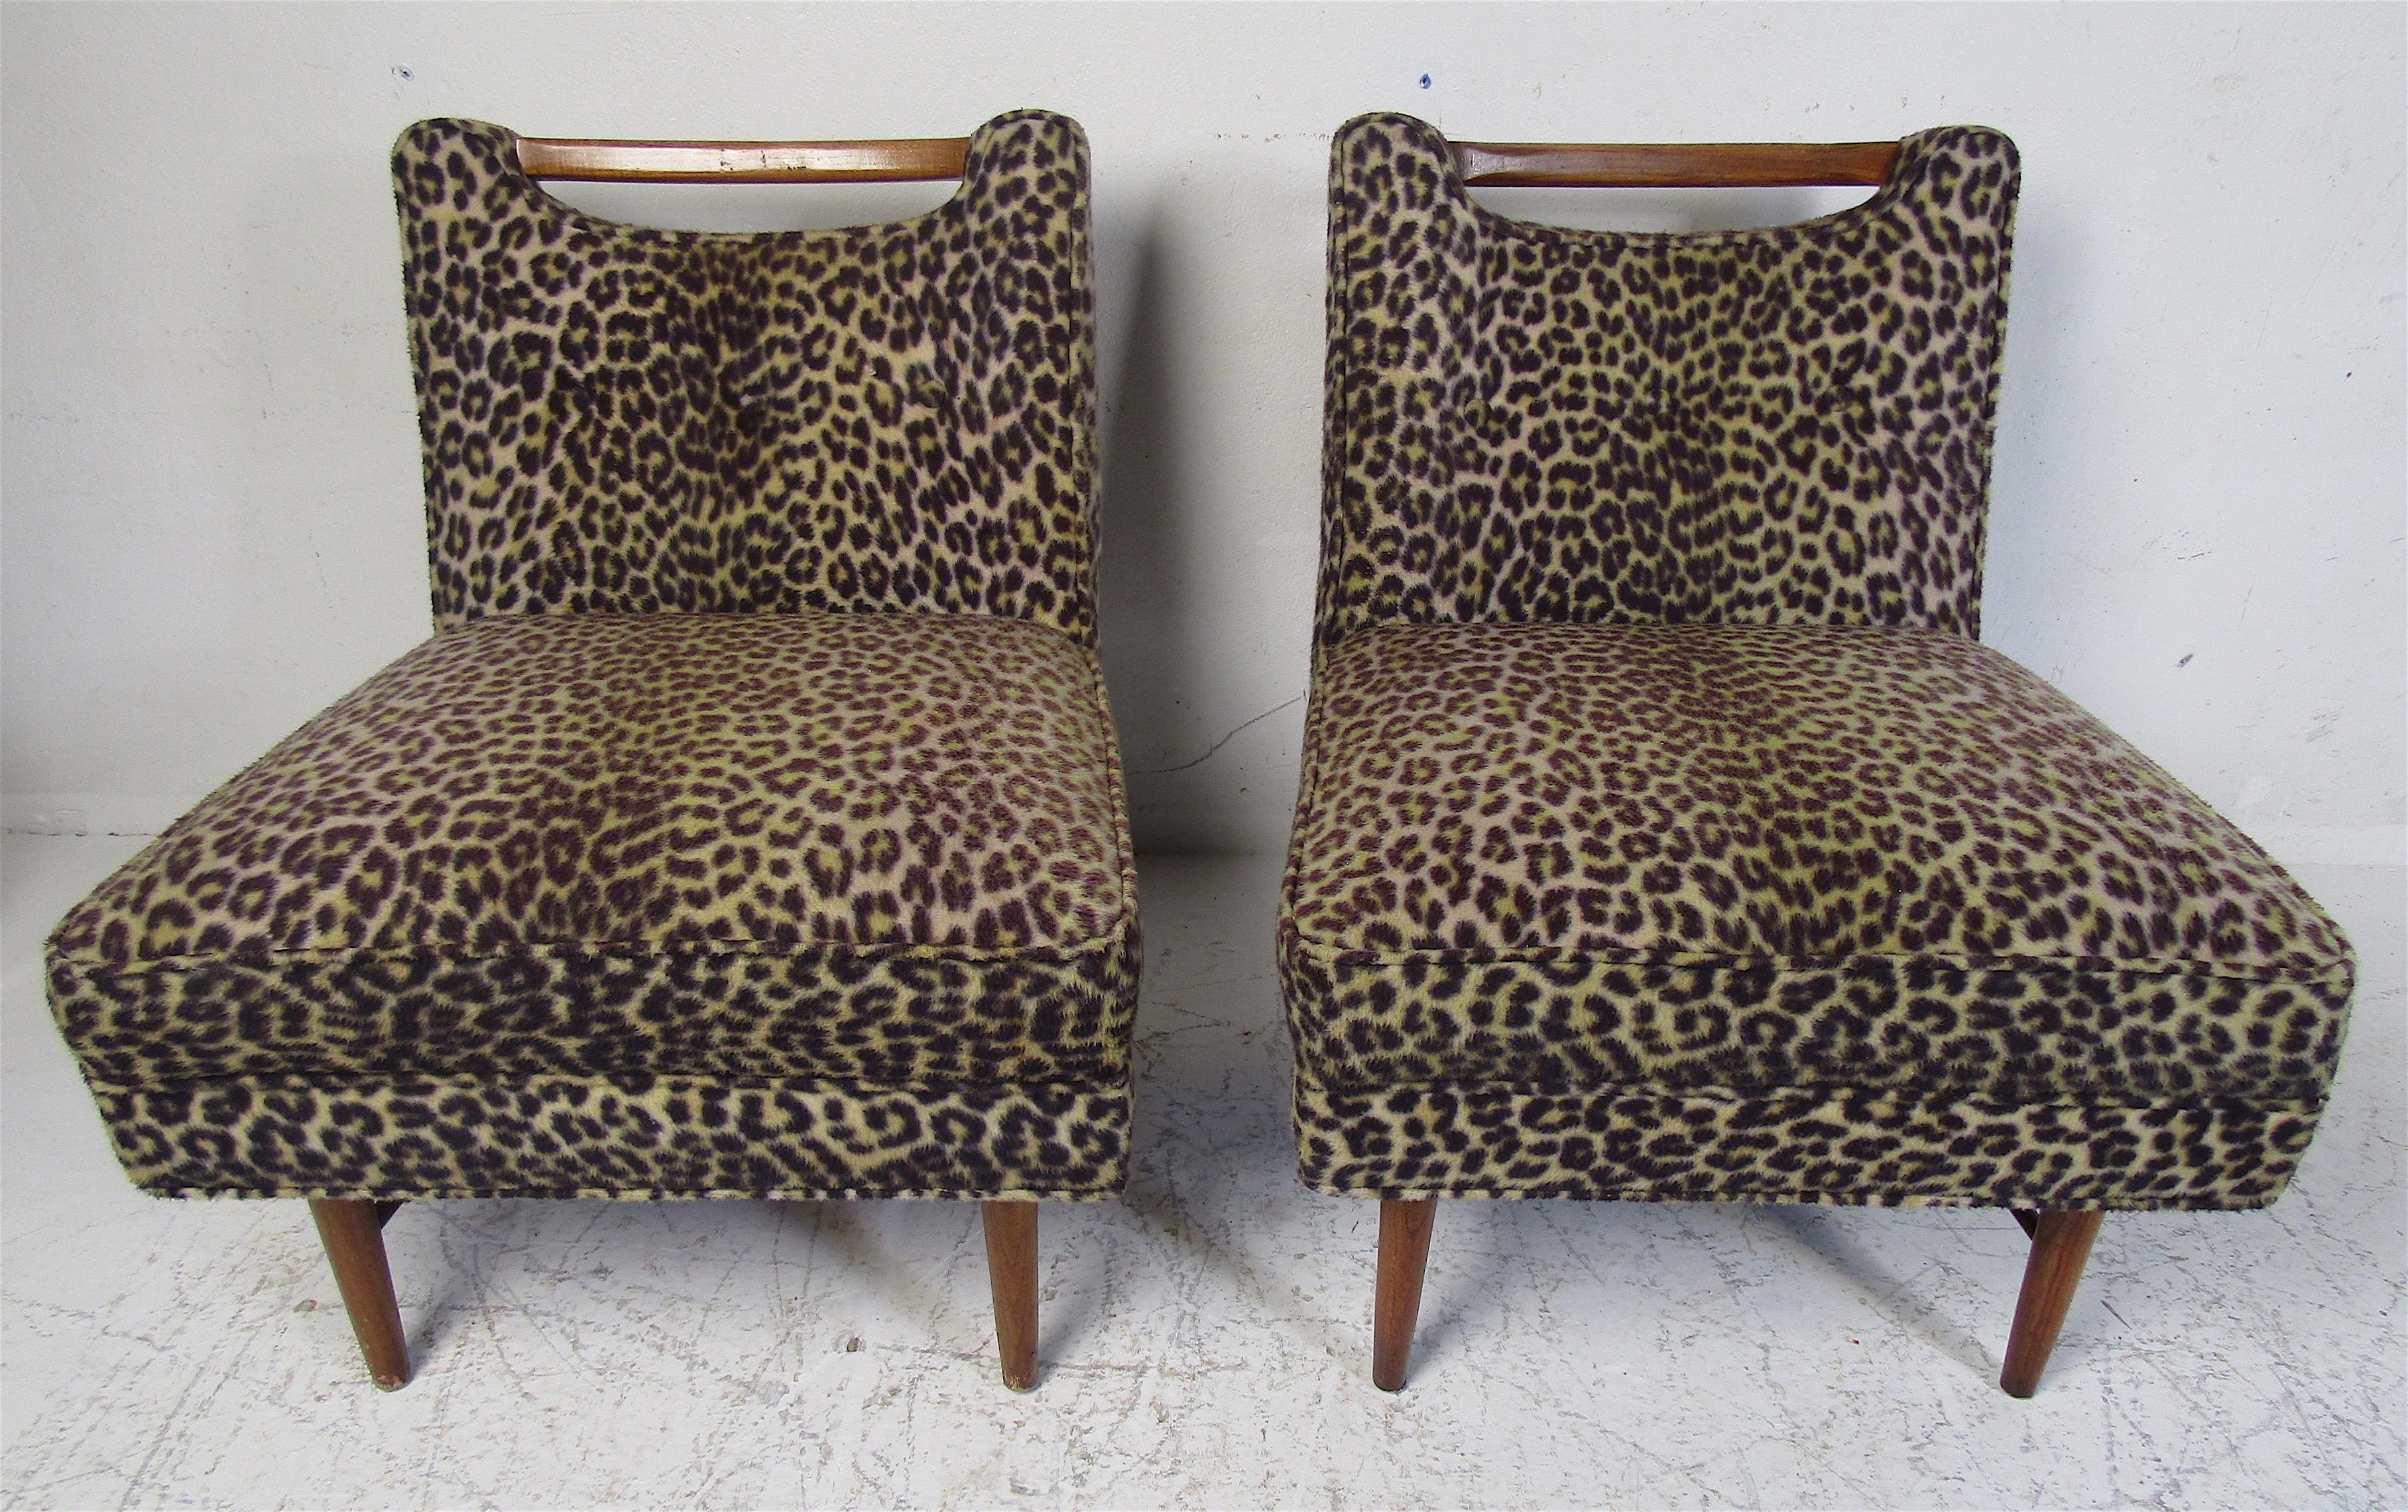 This beautiful pair of vintage lounge chairs feature plush leopard print upholstery and walnut legs. A uniquely designed backrest that features a wood top with a cutout space underneath. This lovely feature also provides a convenient way to move